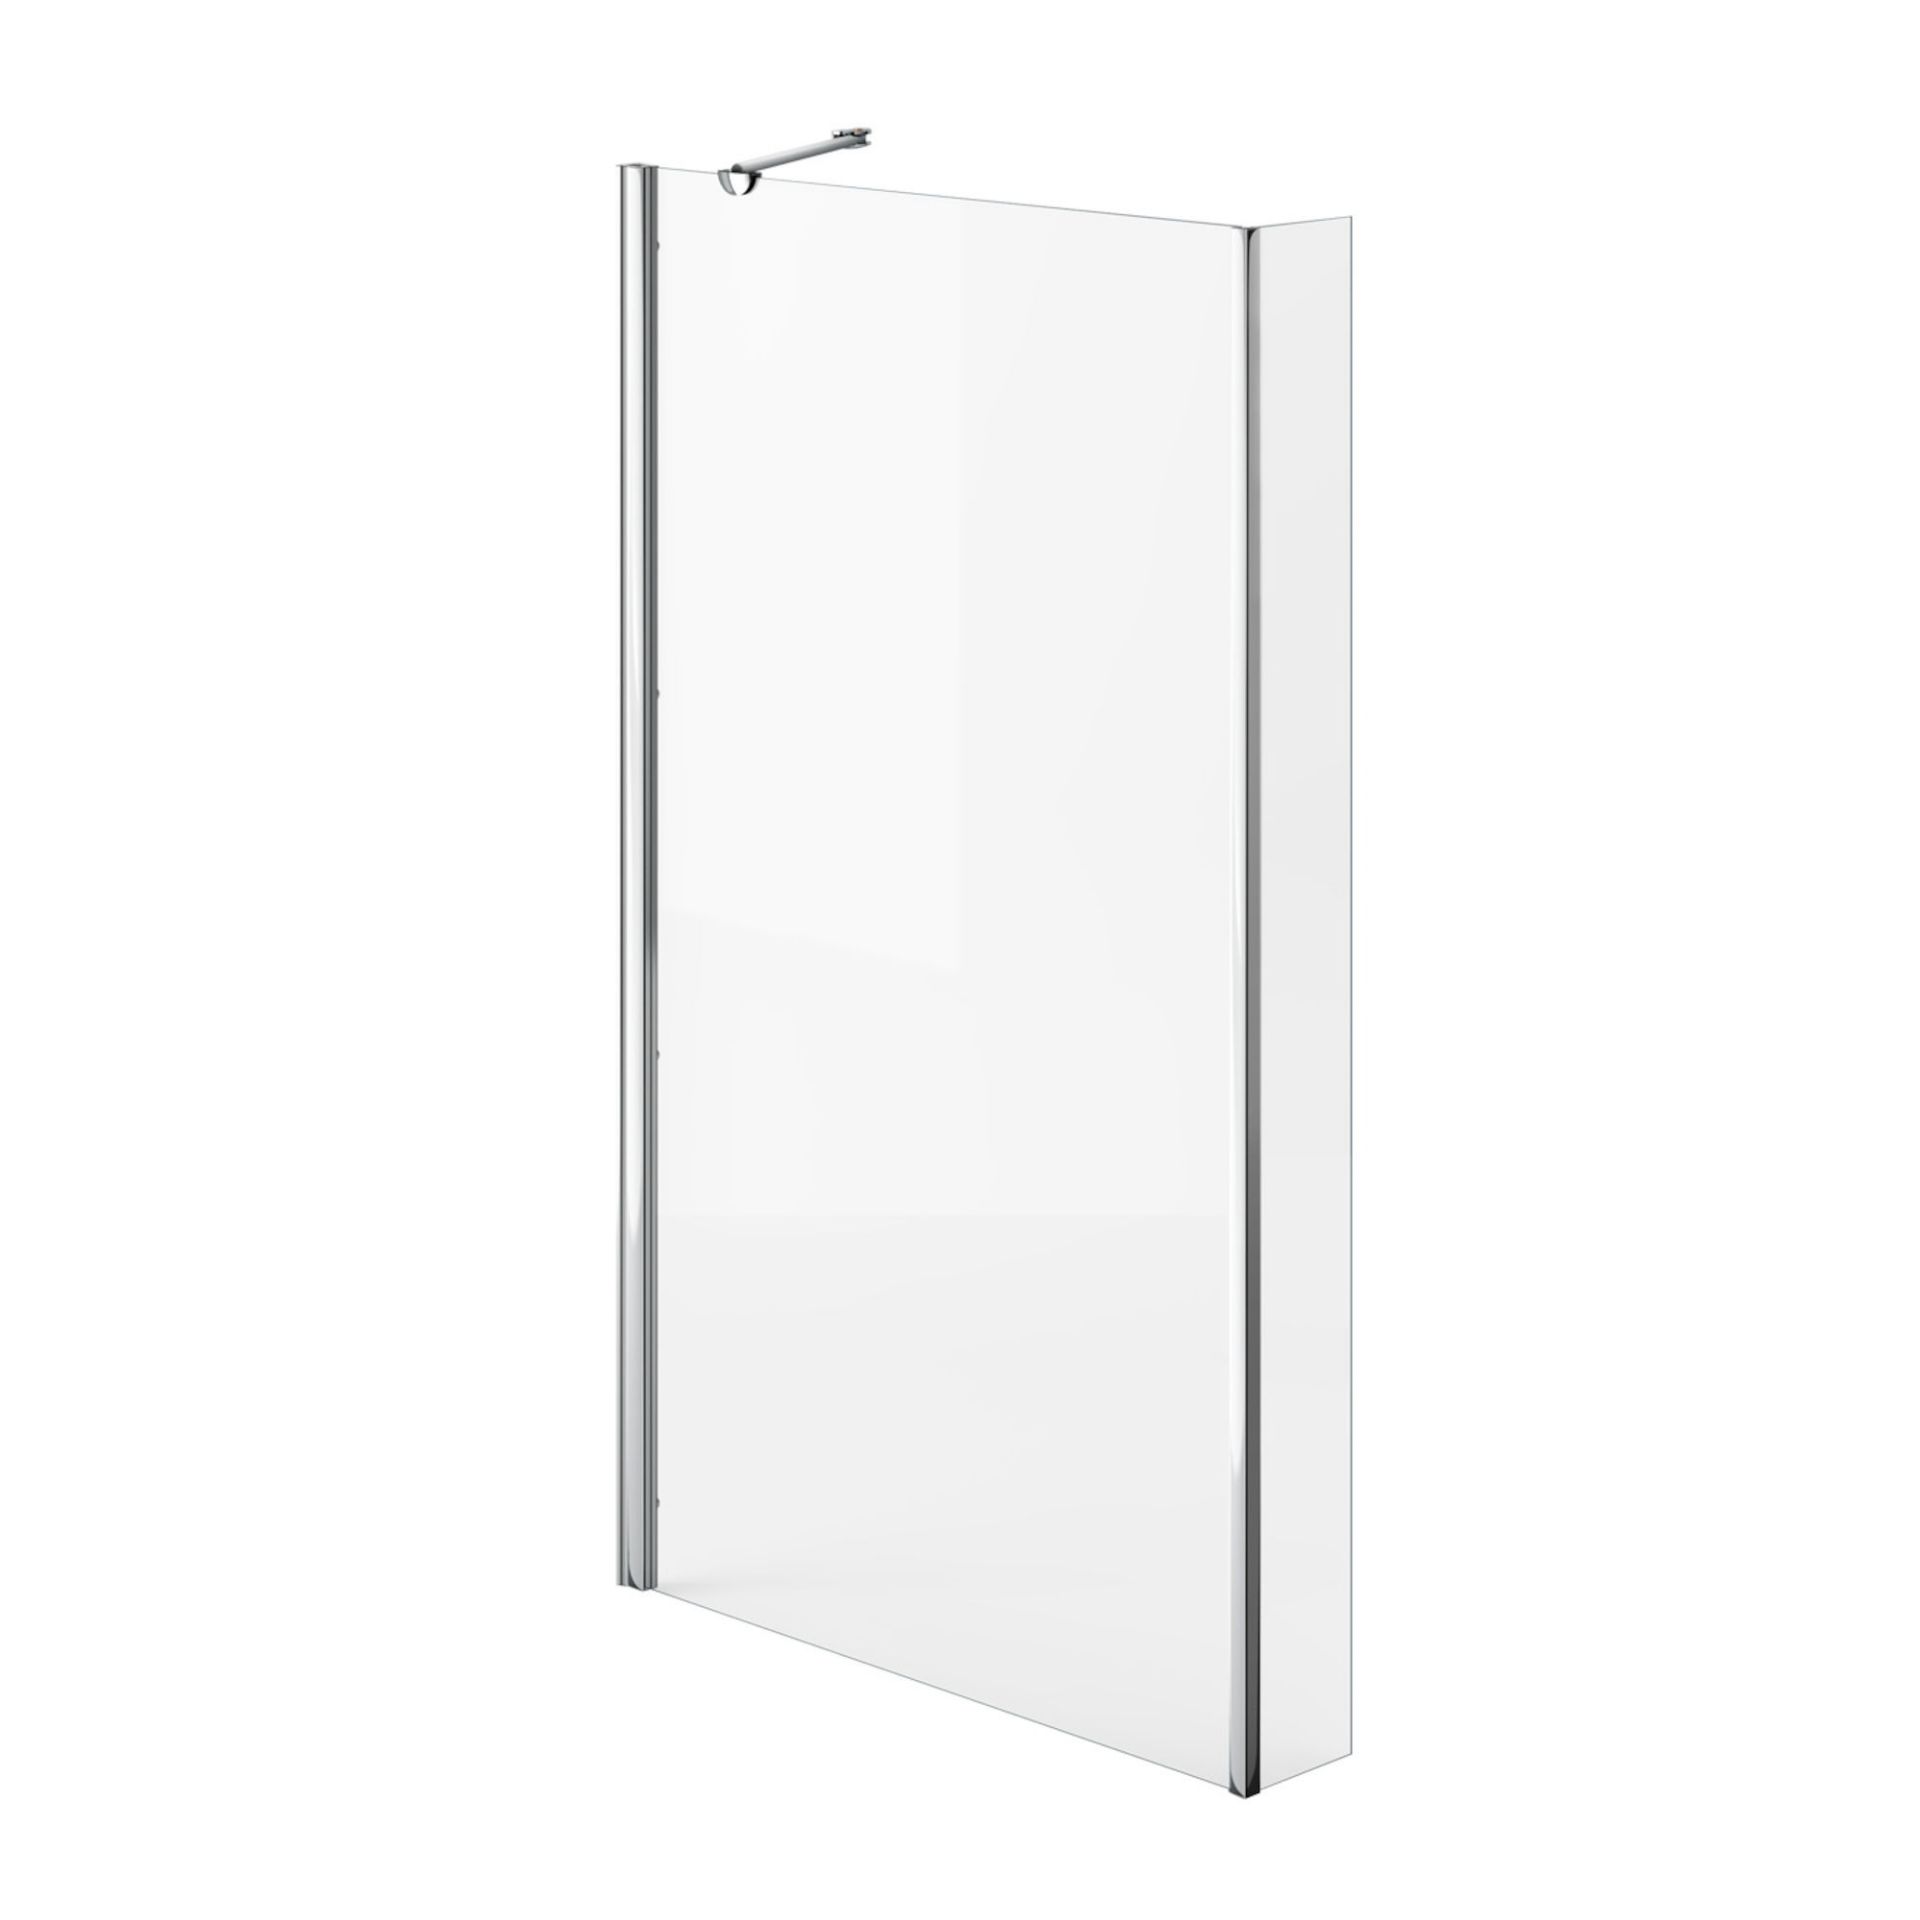 New (Z197) 1500mm L Shape Bath Screen. RRP £189.99. Tempered Saftey Glass Screen Comes Compl...